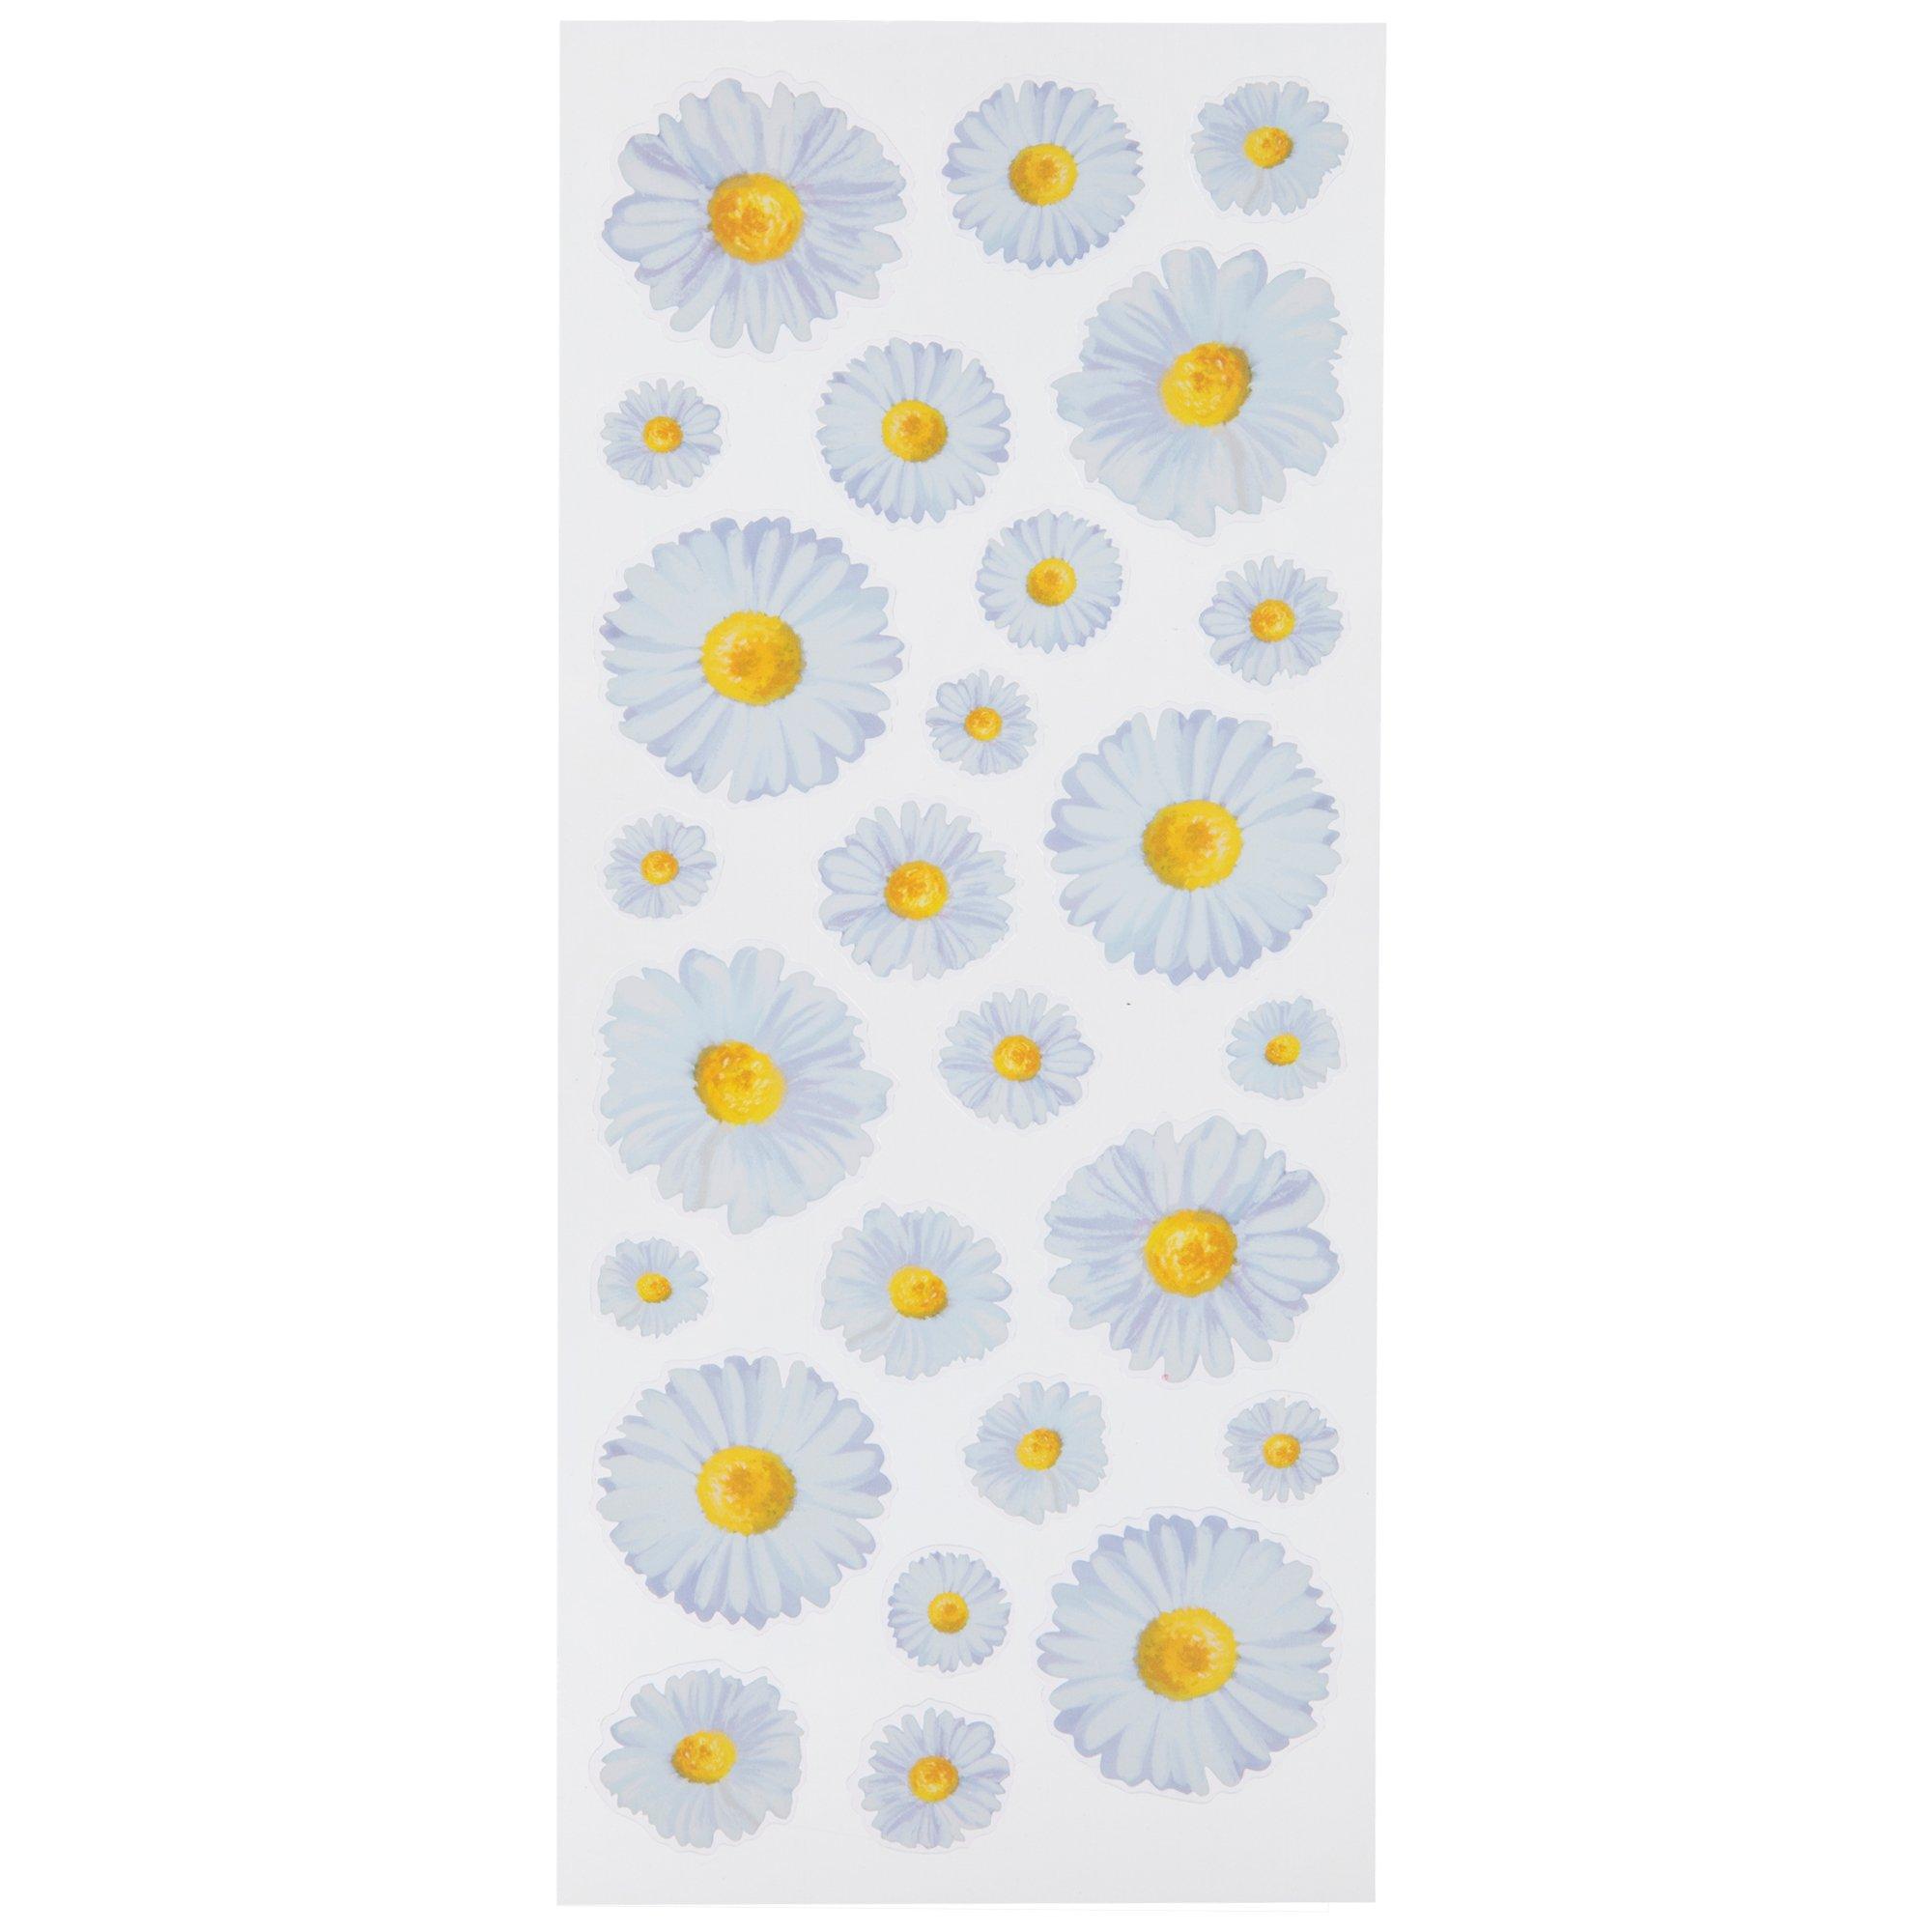 Playside Creations, Felt Daisy Stickers, Assorted Colors, 8 Count